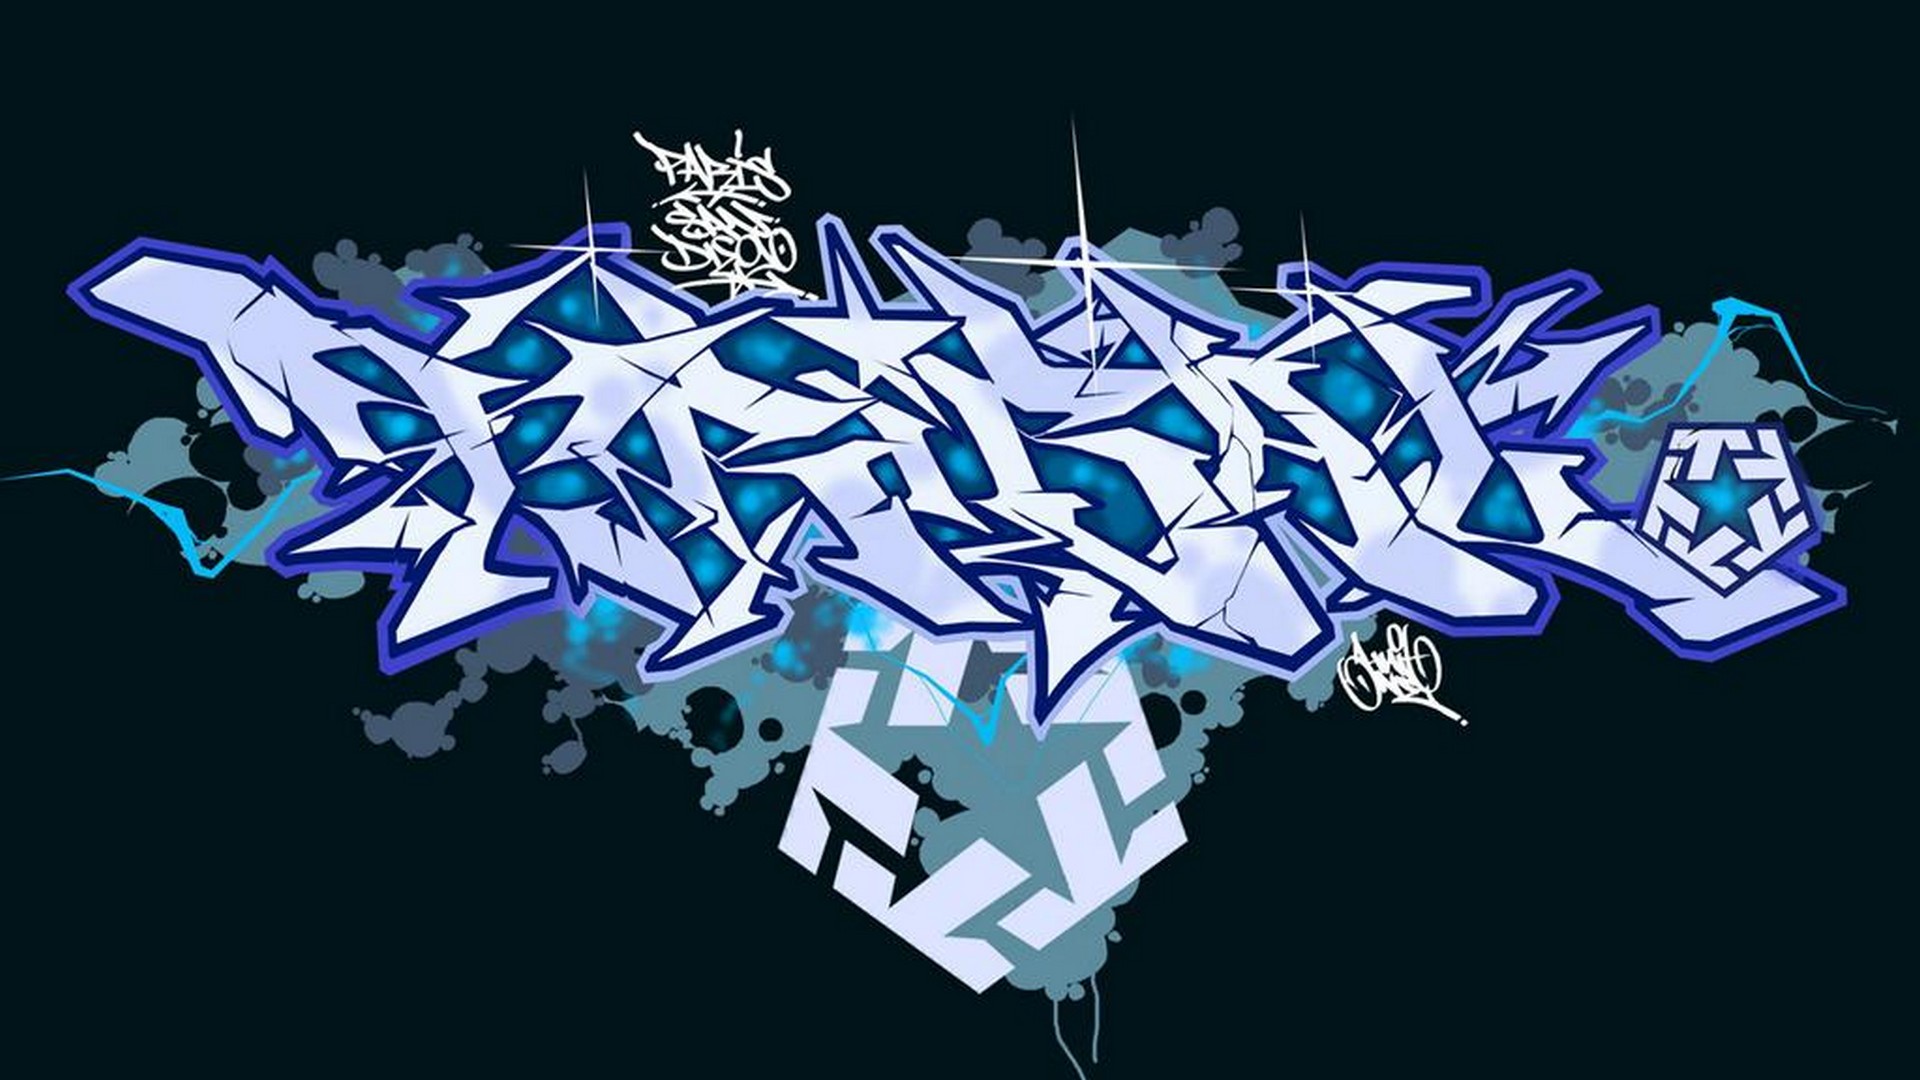 Computer Wallpapers Graffiti Letters with resolution 1920X1080 pixel. You can use this wallpaper as background for your desktop Computer Screensavers, Android or iPhone smartphones